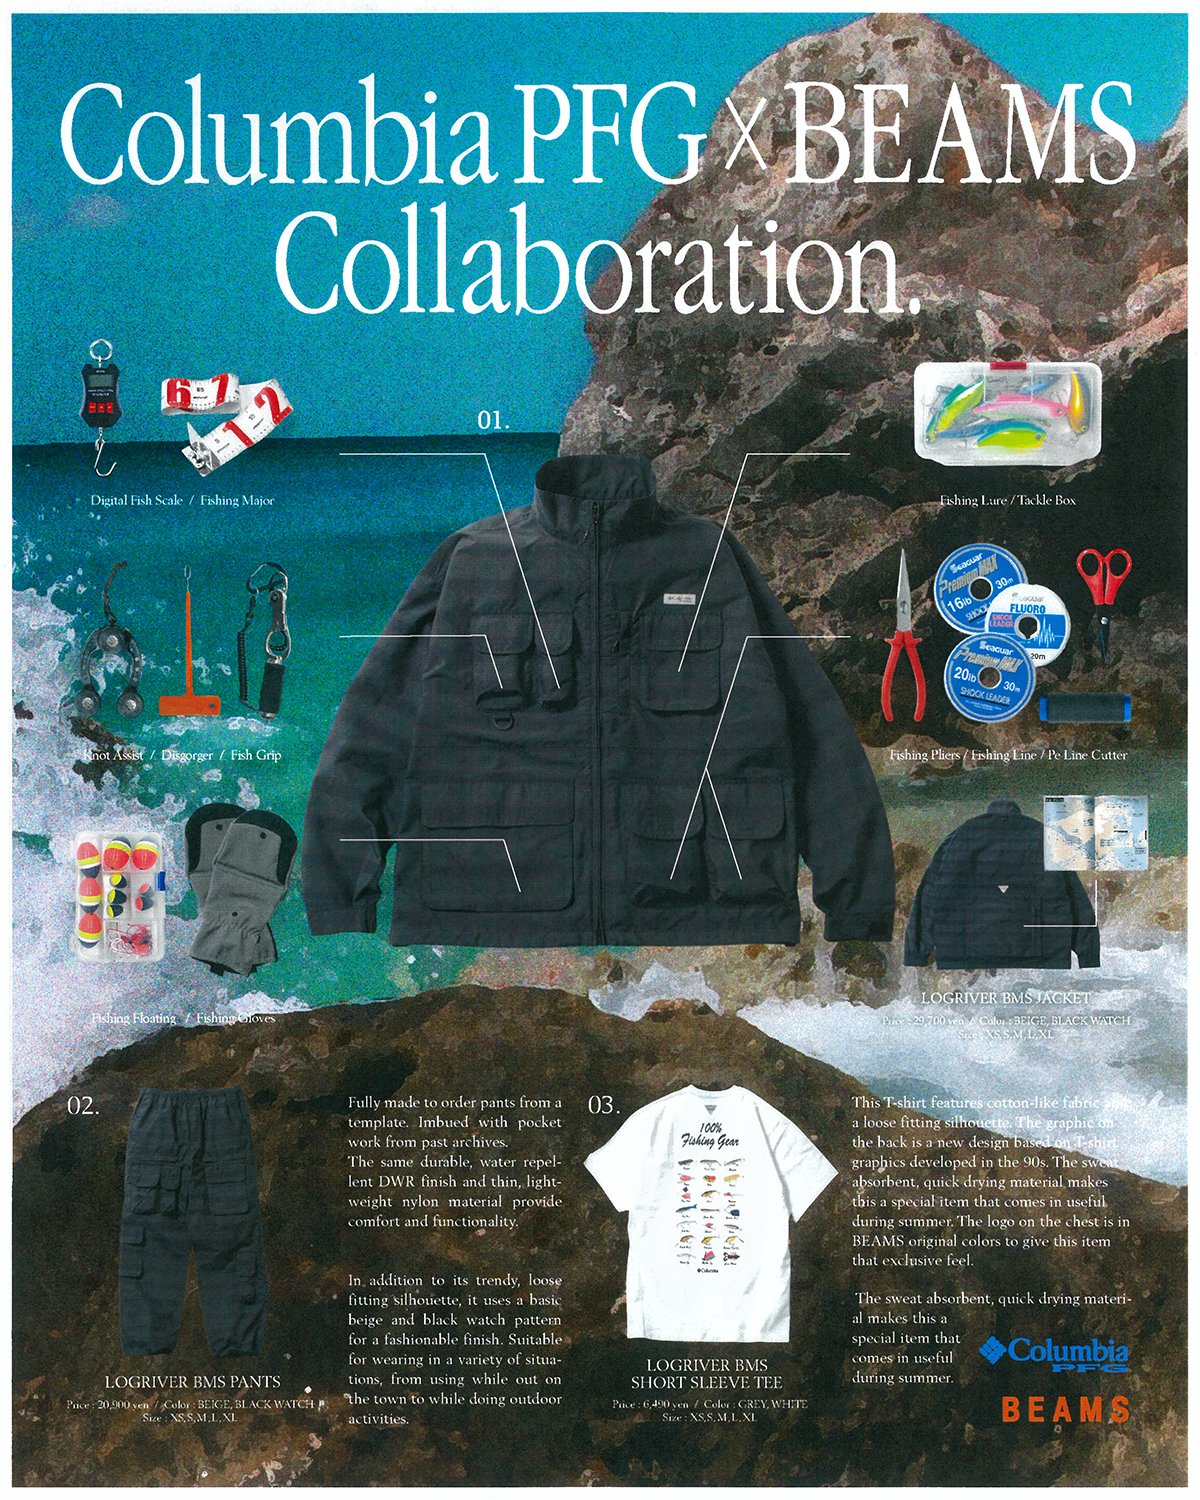 BEAMS and Columbia PFG Dig Into the Archives for Their Third Collaboration  — eye_C